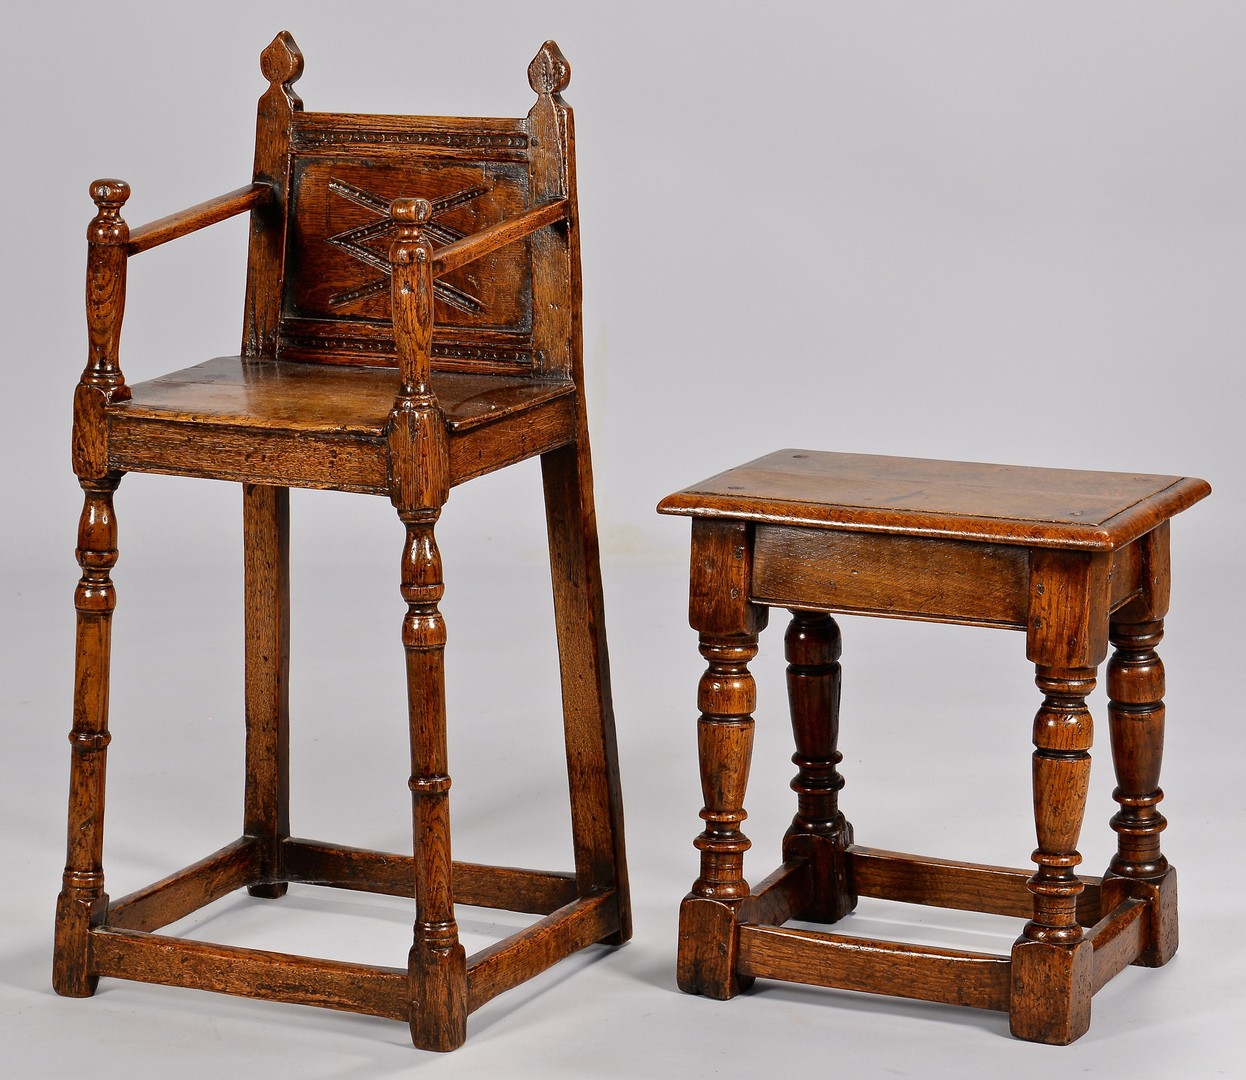 Lot 317: English Jacobean High Chair and small Table/stool